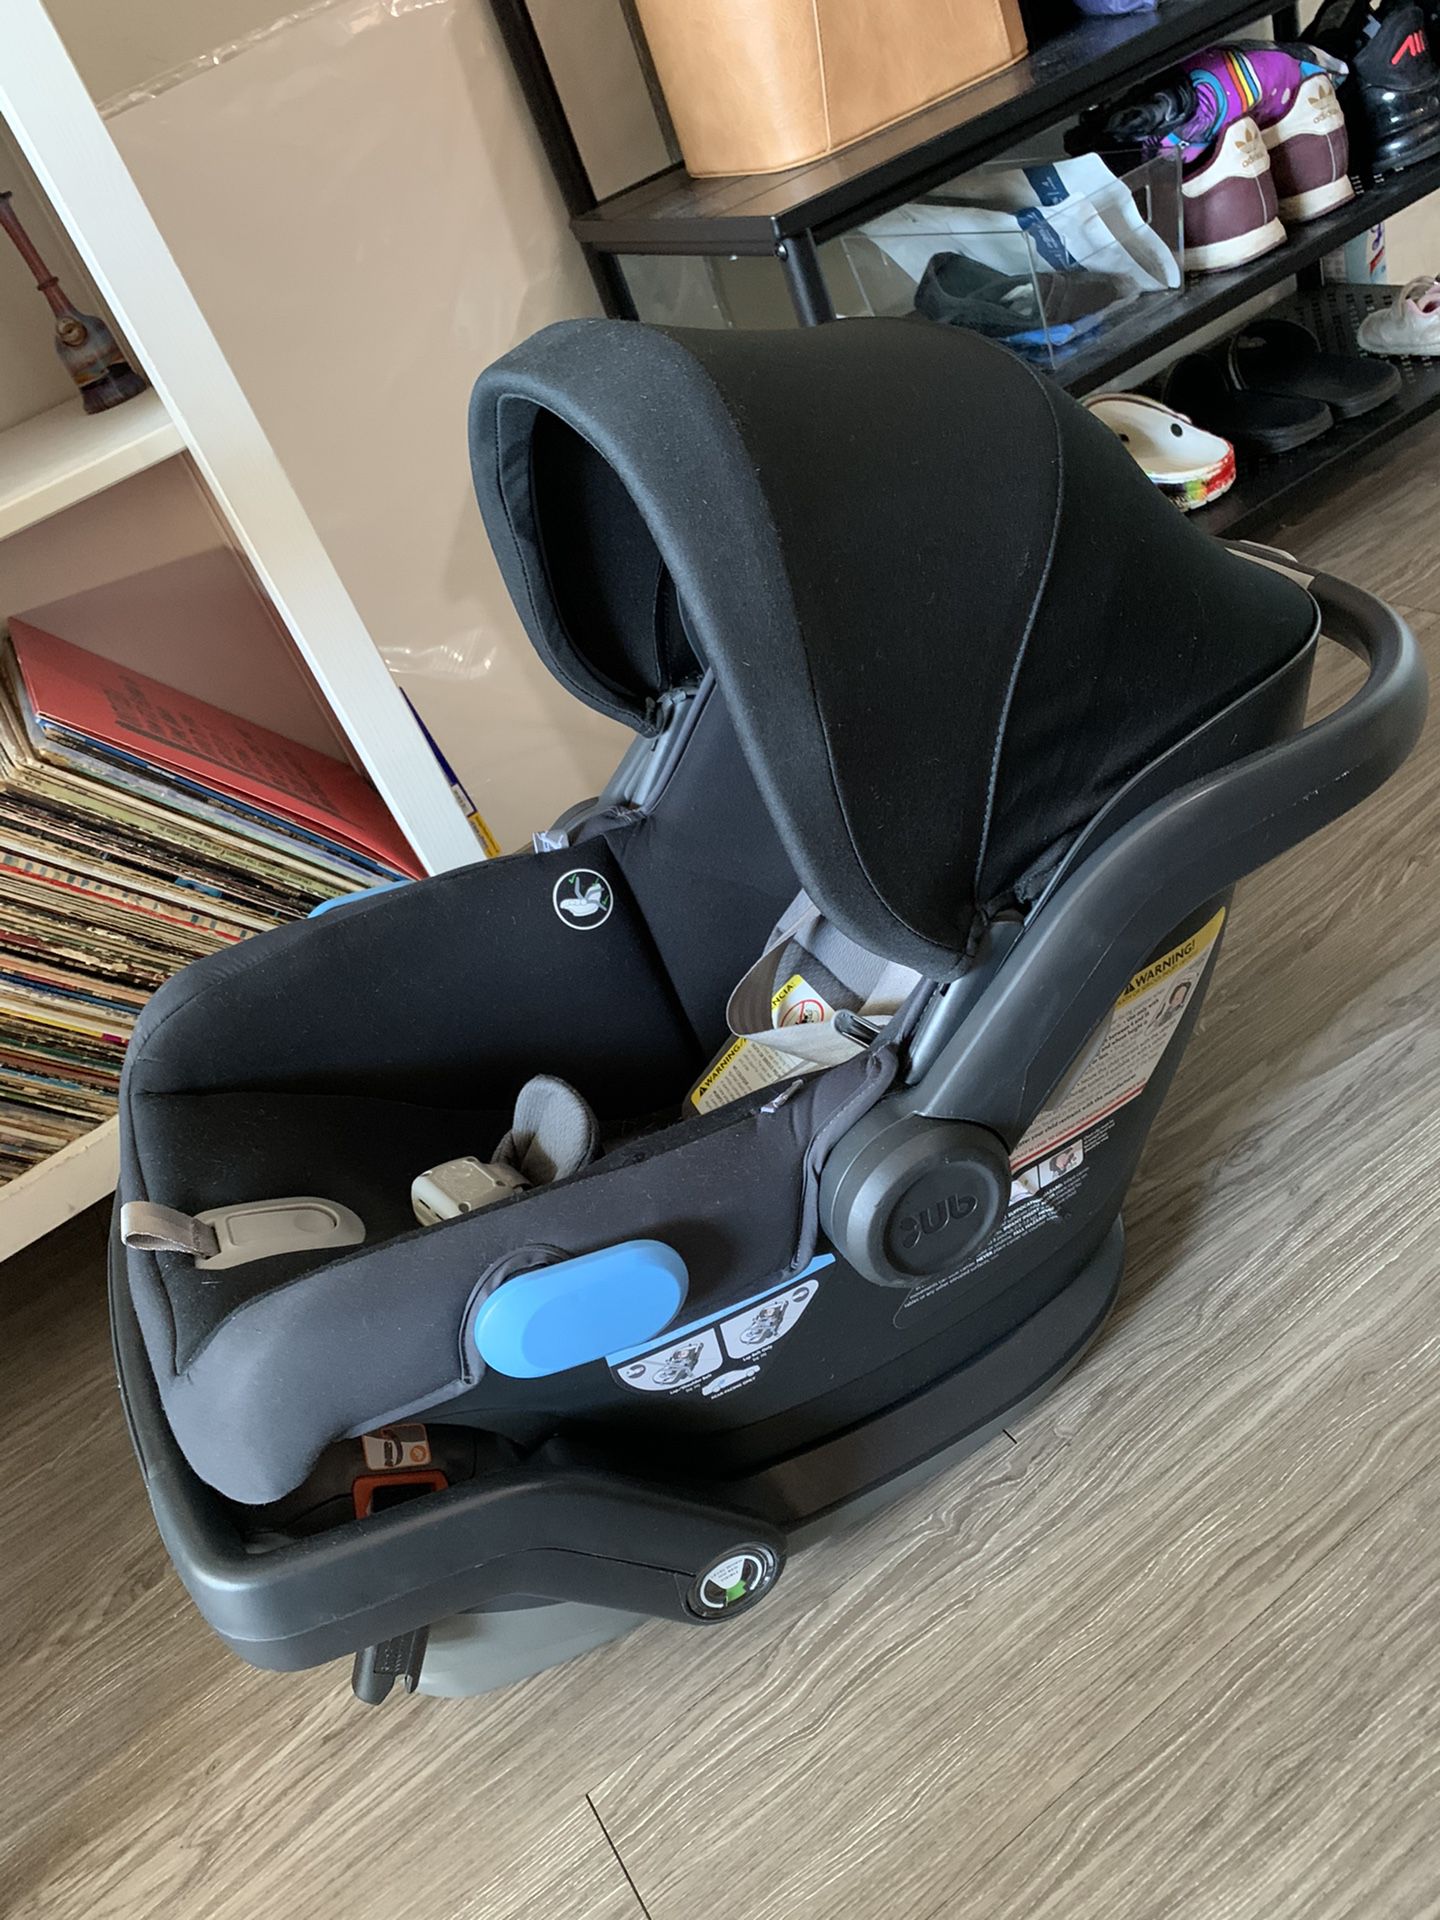 Uppa Baby Mesa Infant Car Seat in Jake Black with Warranty and receipt of purchase.